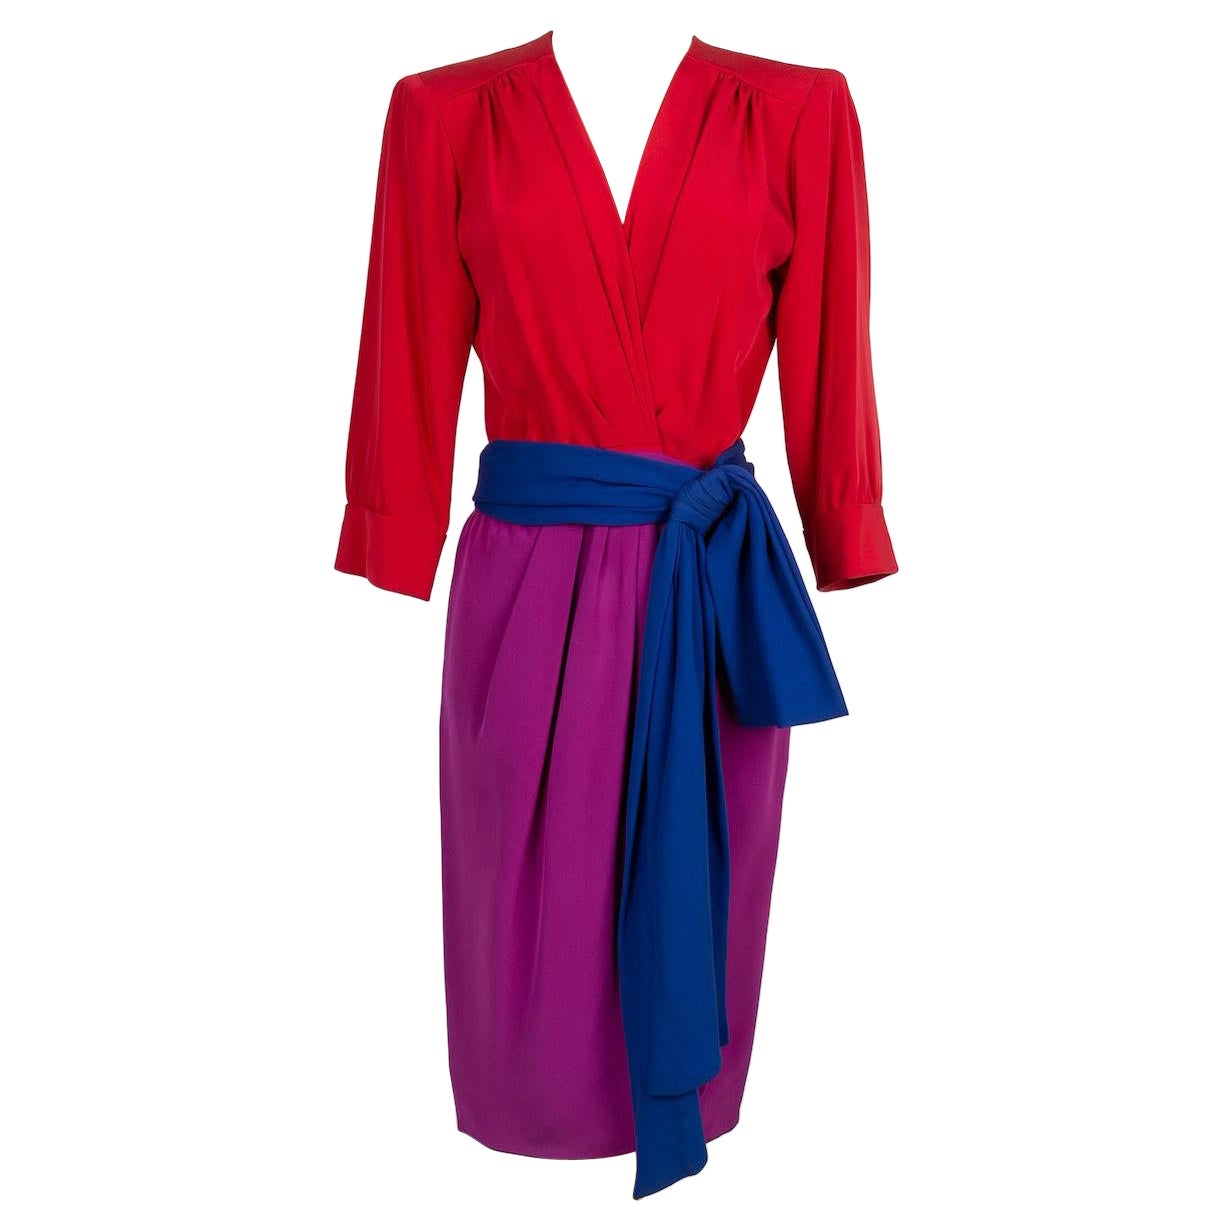 Yves Saint Laurent Purple and Red Silk Haute Couture Dress with Blue Silk Belt